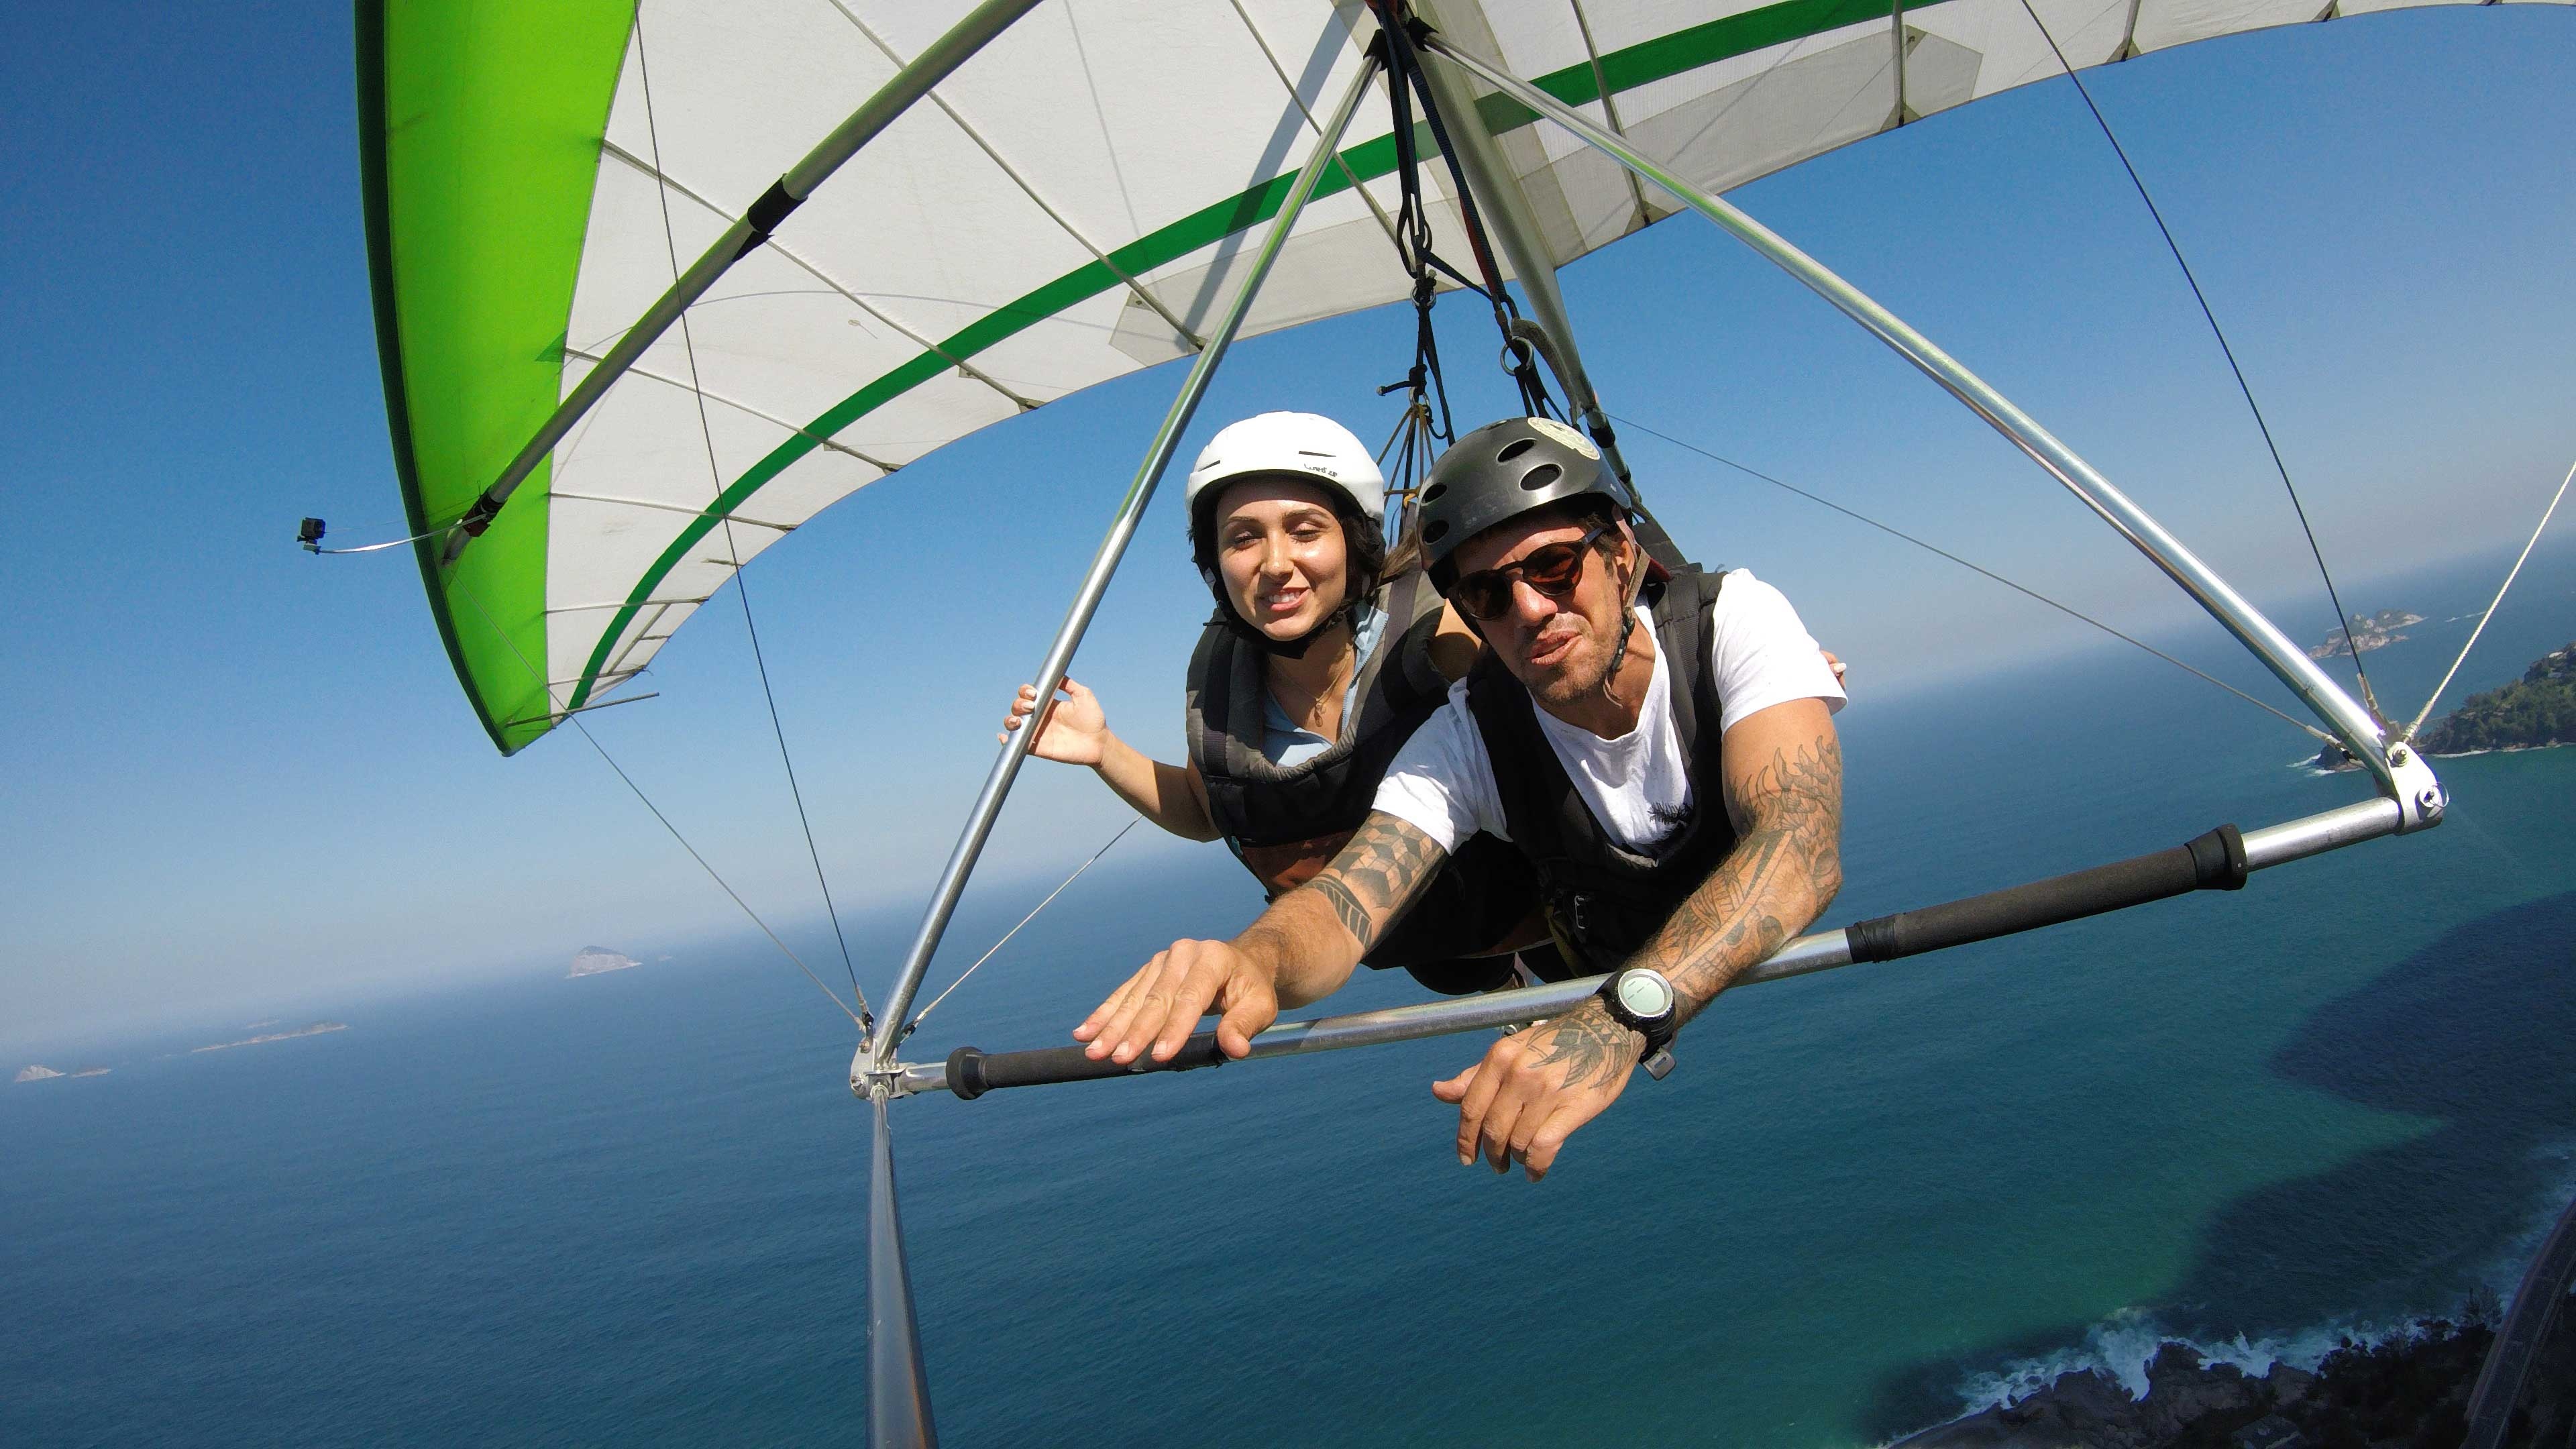 Hang Gliding: Flying guru, Tandem flying tours, Active leisure and Sport air activities. 3840x2160 4K Wallpaper.